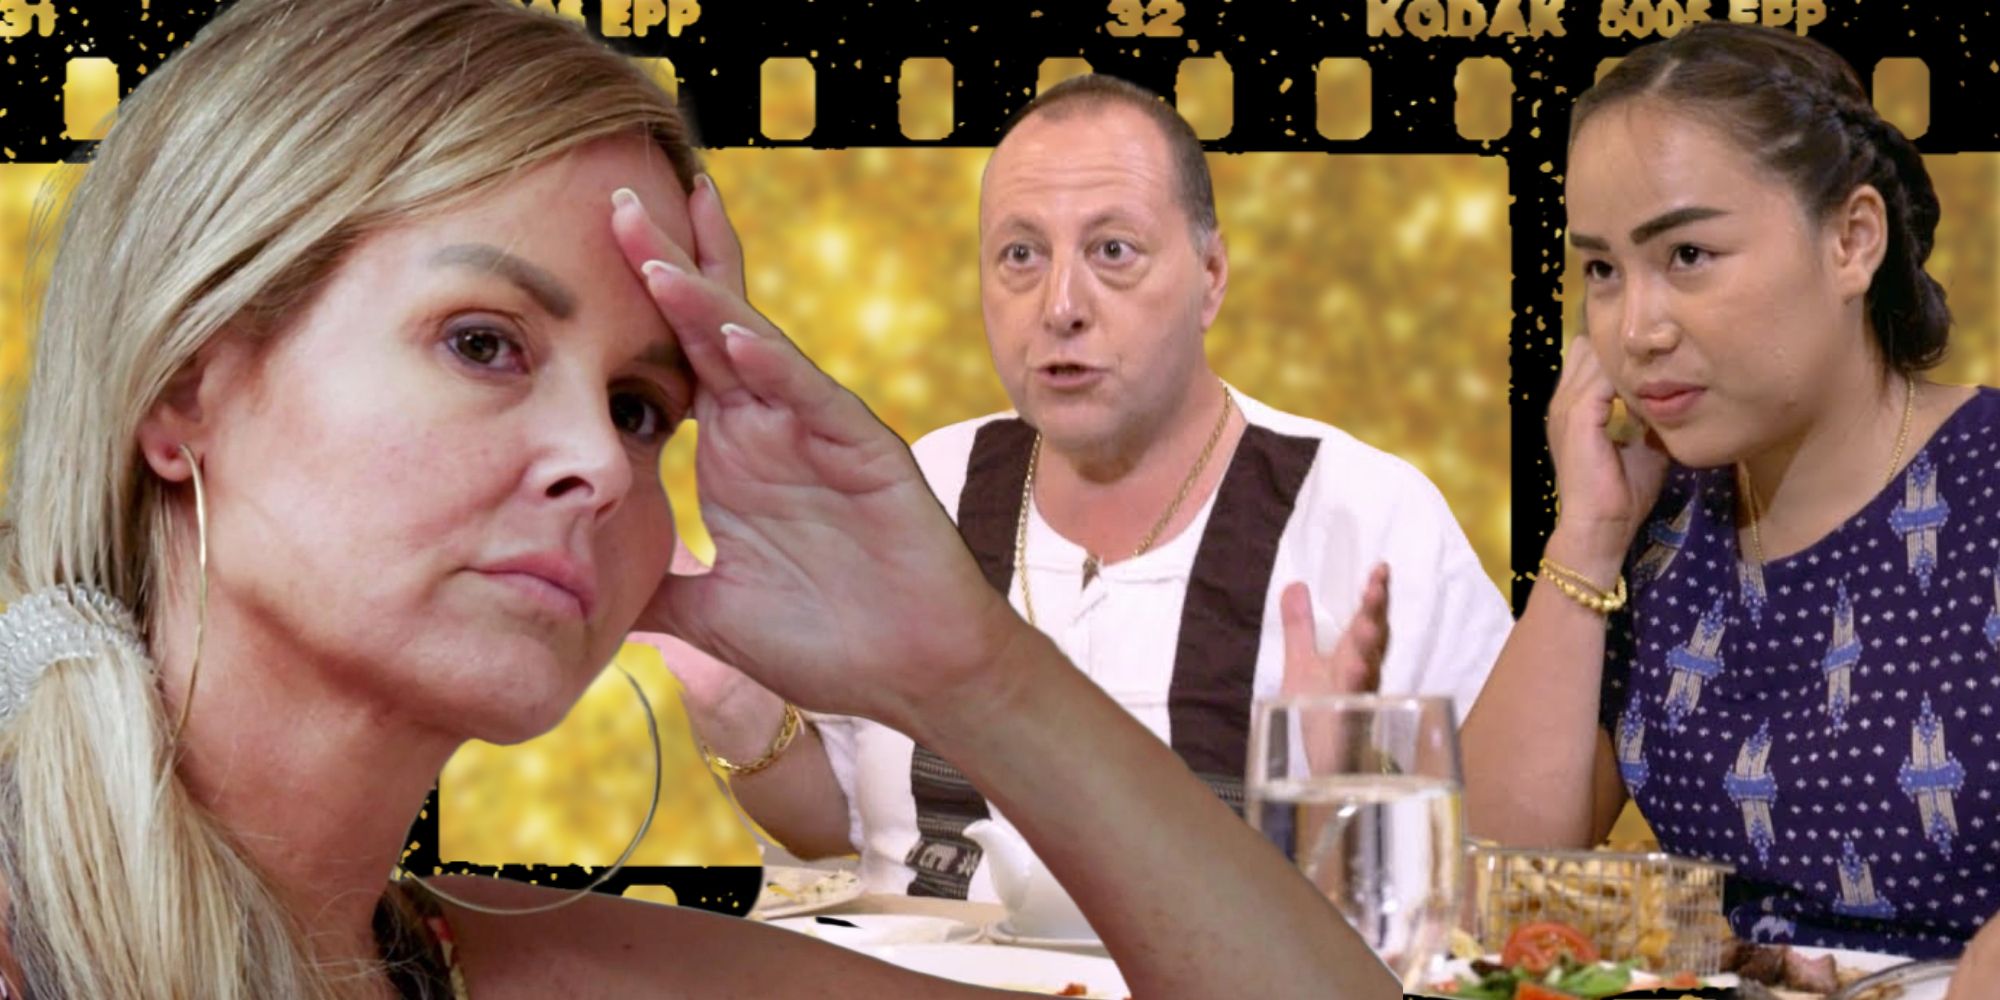 90 Day Fiancé Stars Annie, David and Stephanie Davison appear disgruntled against a black and gold background. 